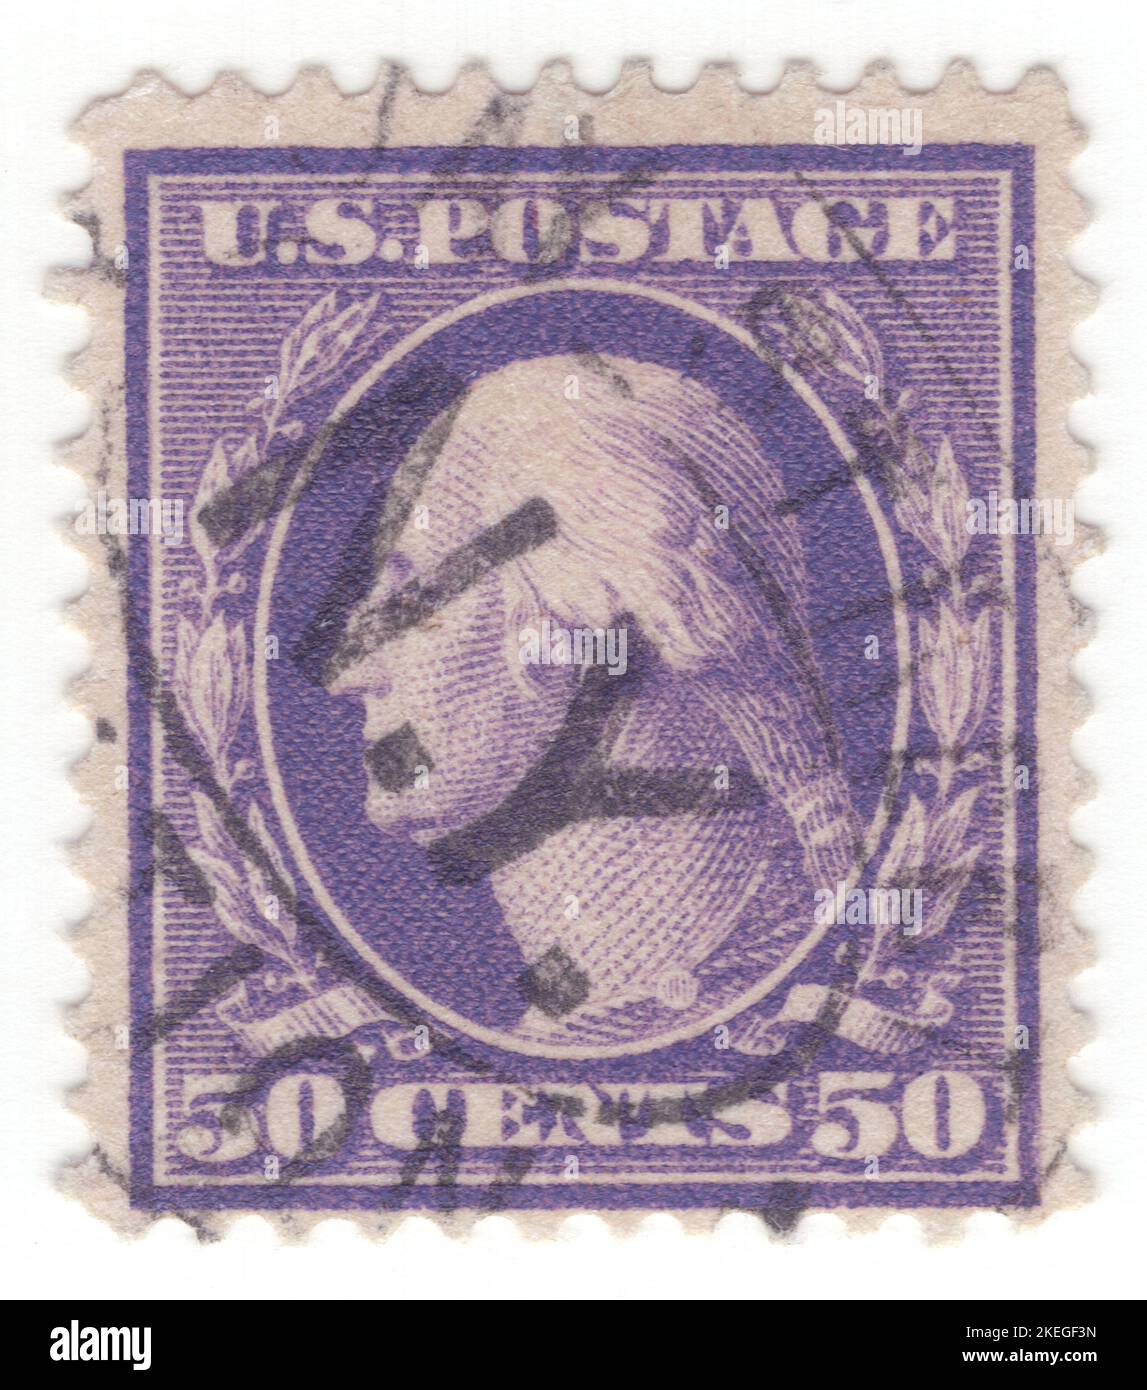 USA - 1909: An 50 cents violet postage stamp depicting portrait of George Washington. American military officer, statesman, and Founding Father who served as the first president of the United States from 1789 to 1797. Appointed by the Continental Congress as commander of the Continental Army, Washington led the Patriot forces to victory in the American Revolutionary War and served as the president of the Constitutional Convention of 1787, which created the Constitution of the United States and the American federal government. Washington has been called the "Father of his Country" Stock Photo